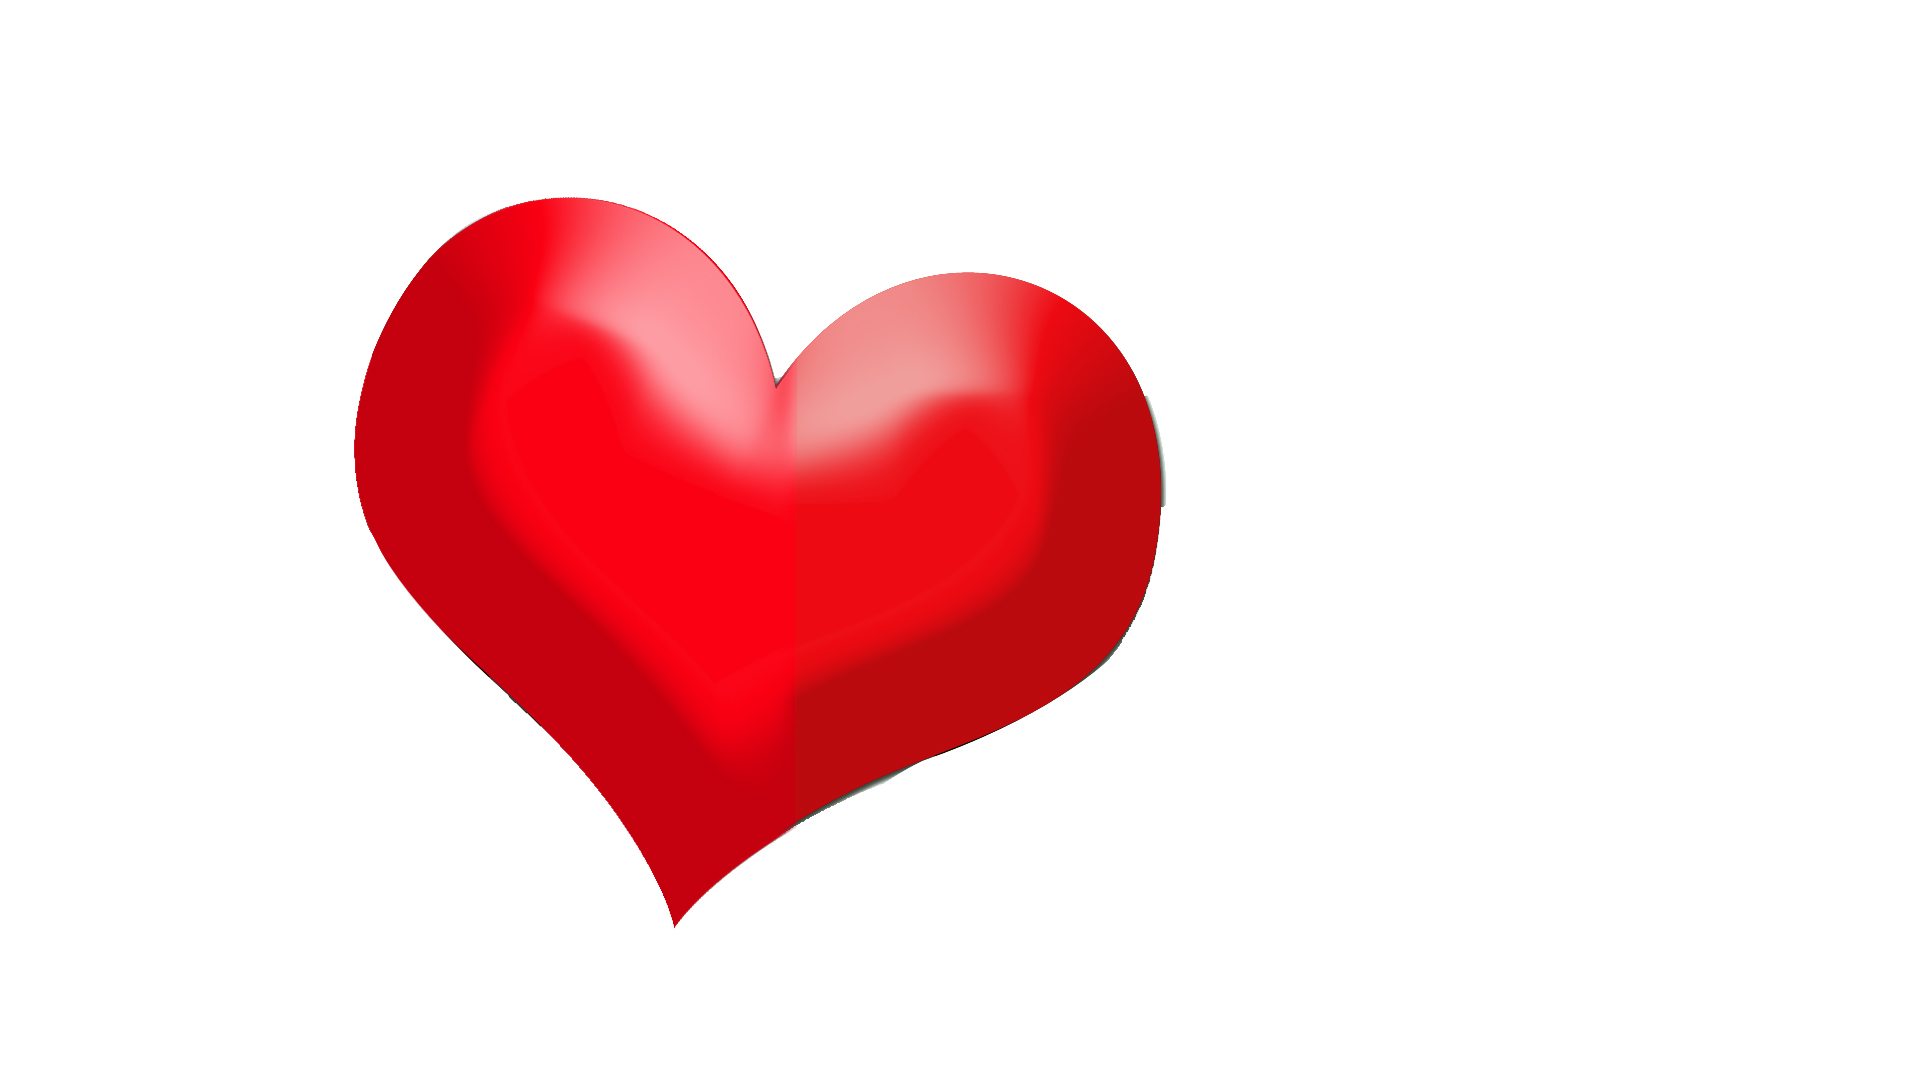 heart clipart free download - photo #22